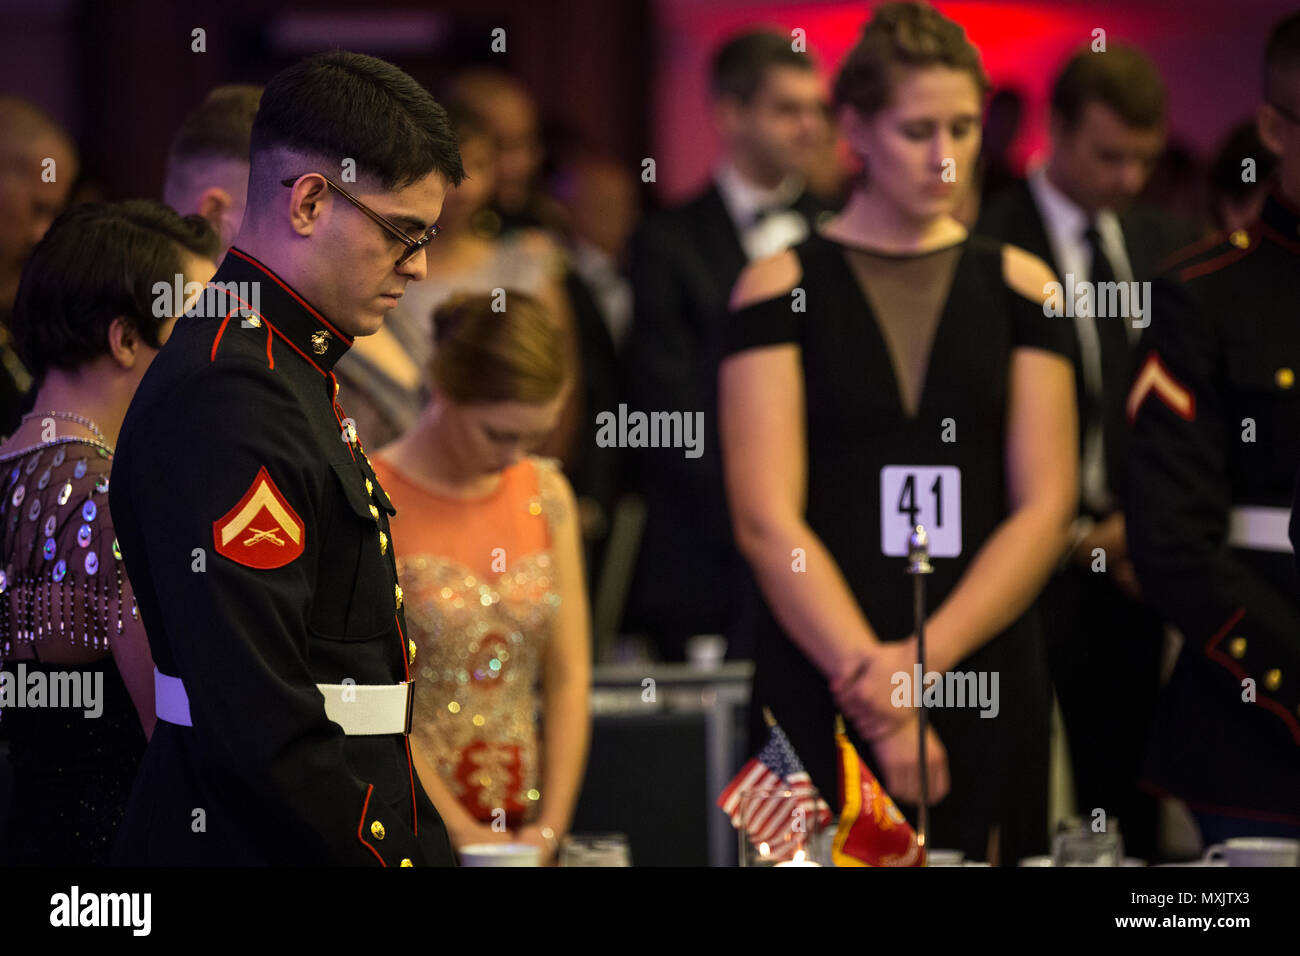 A U.S. Marine bows his head in prayer during the Headquarters & Service Battalion Marine Corps Ball at the Renaissance Arlington Capitol View Hotel, Arlington, Va., Nov. 05, 2016. The ball was held in celebration of the Marine Corps’ 241st birthday. (U.S. Marine Corps photo by Pfc. Alex A. Quiles) Stock Photo